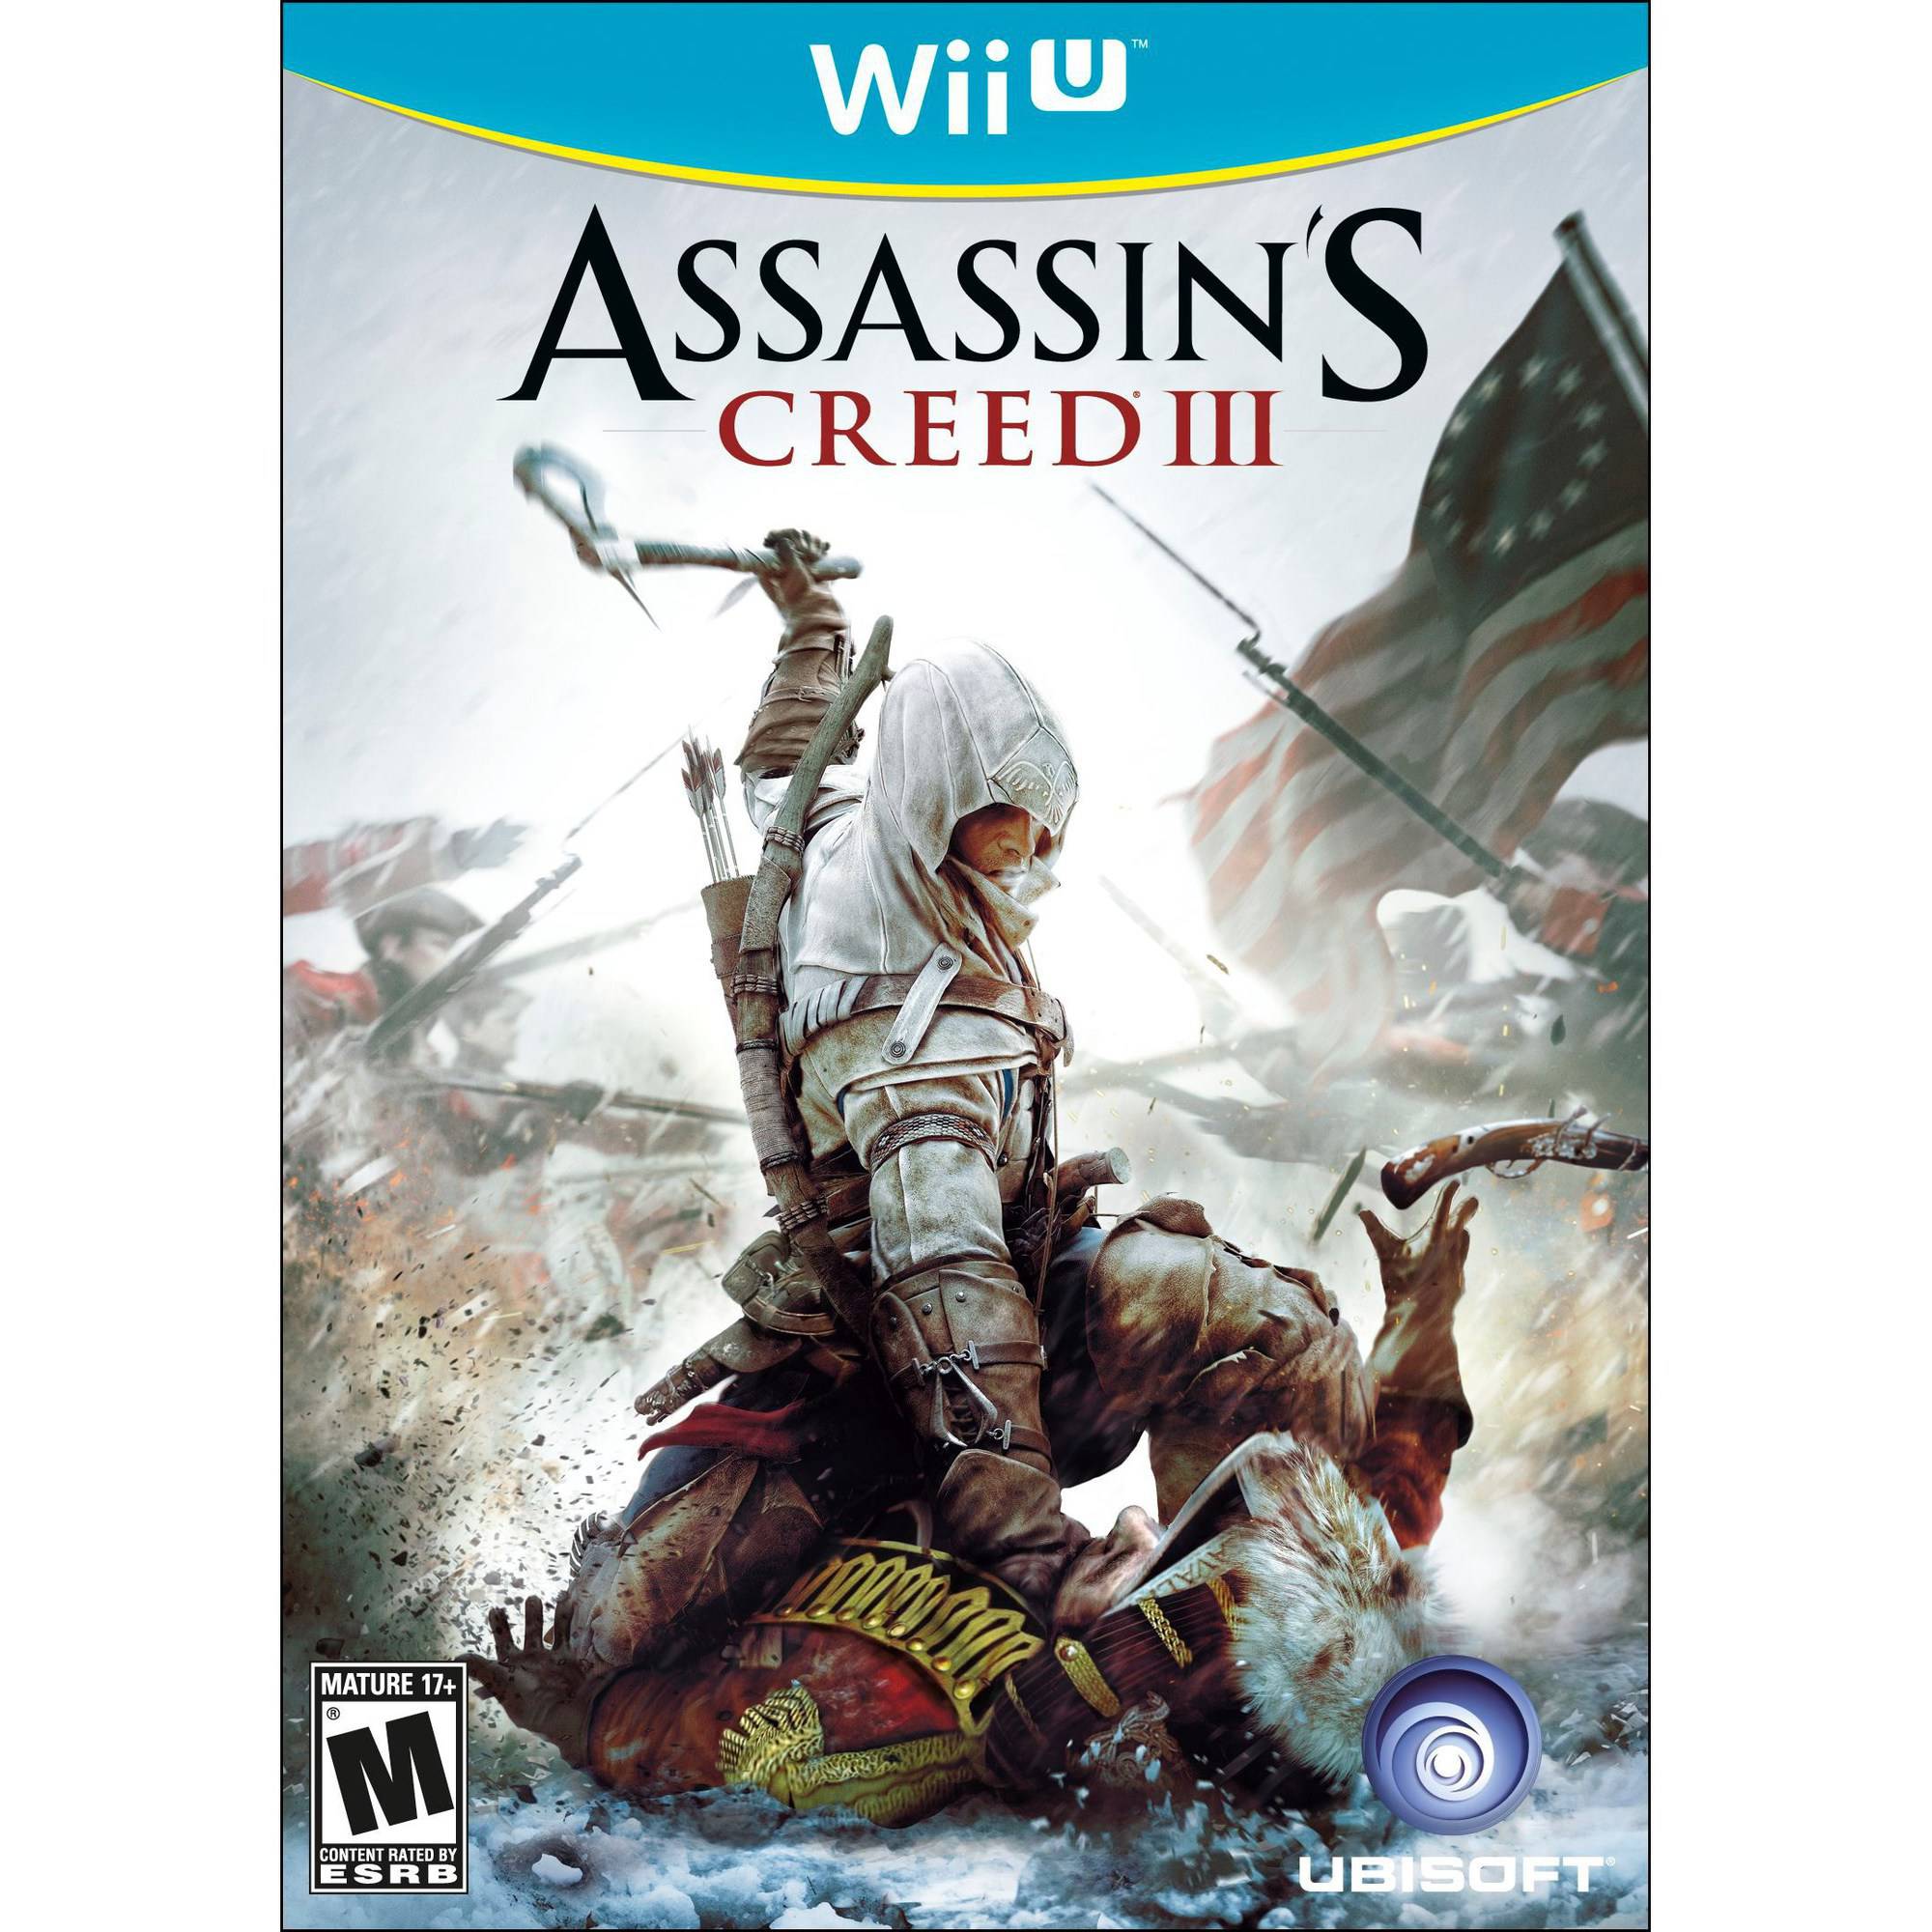 Assassin's Creed 3 (wii U) - Pre-owned - image 1 of 7